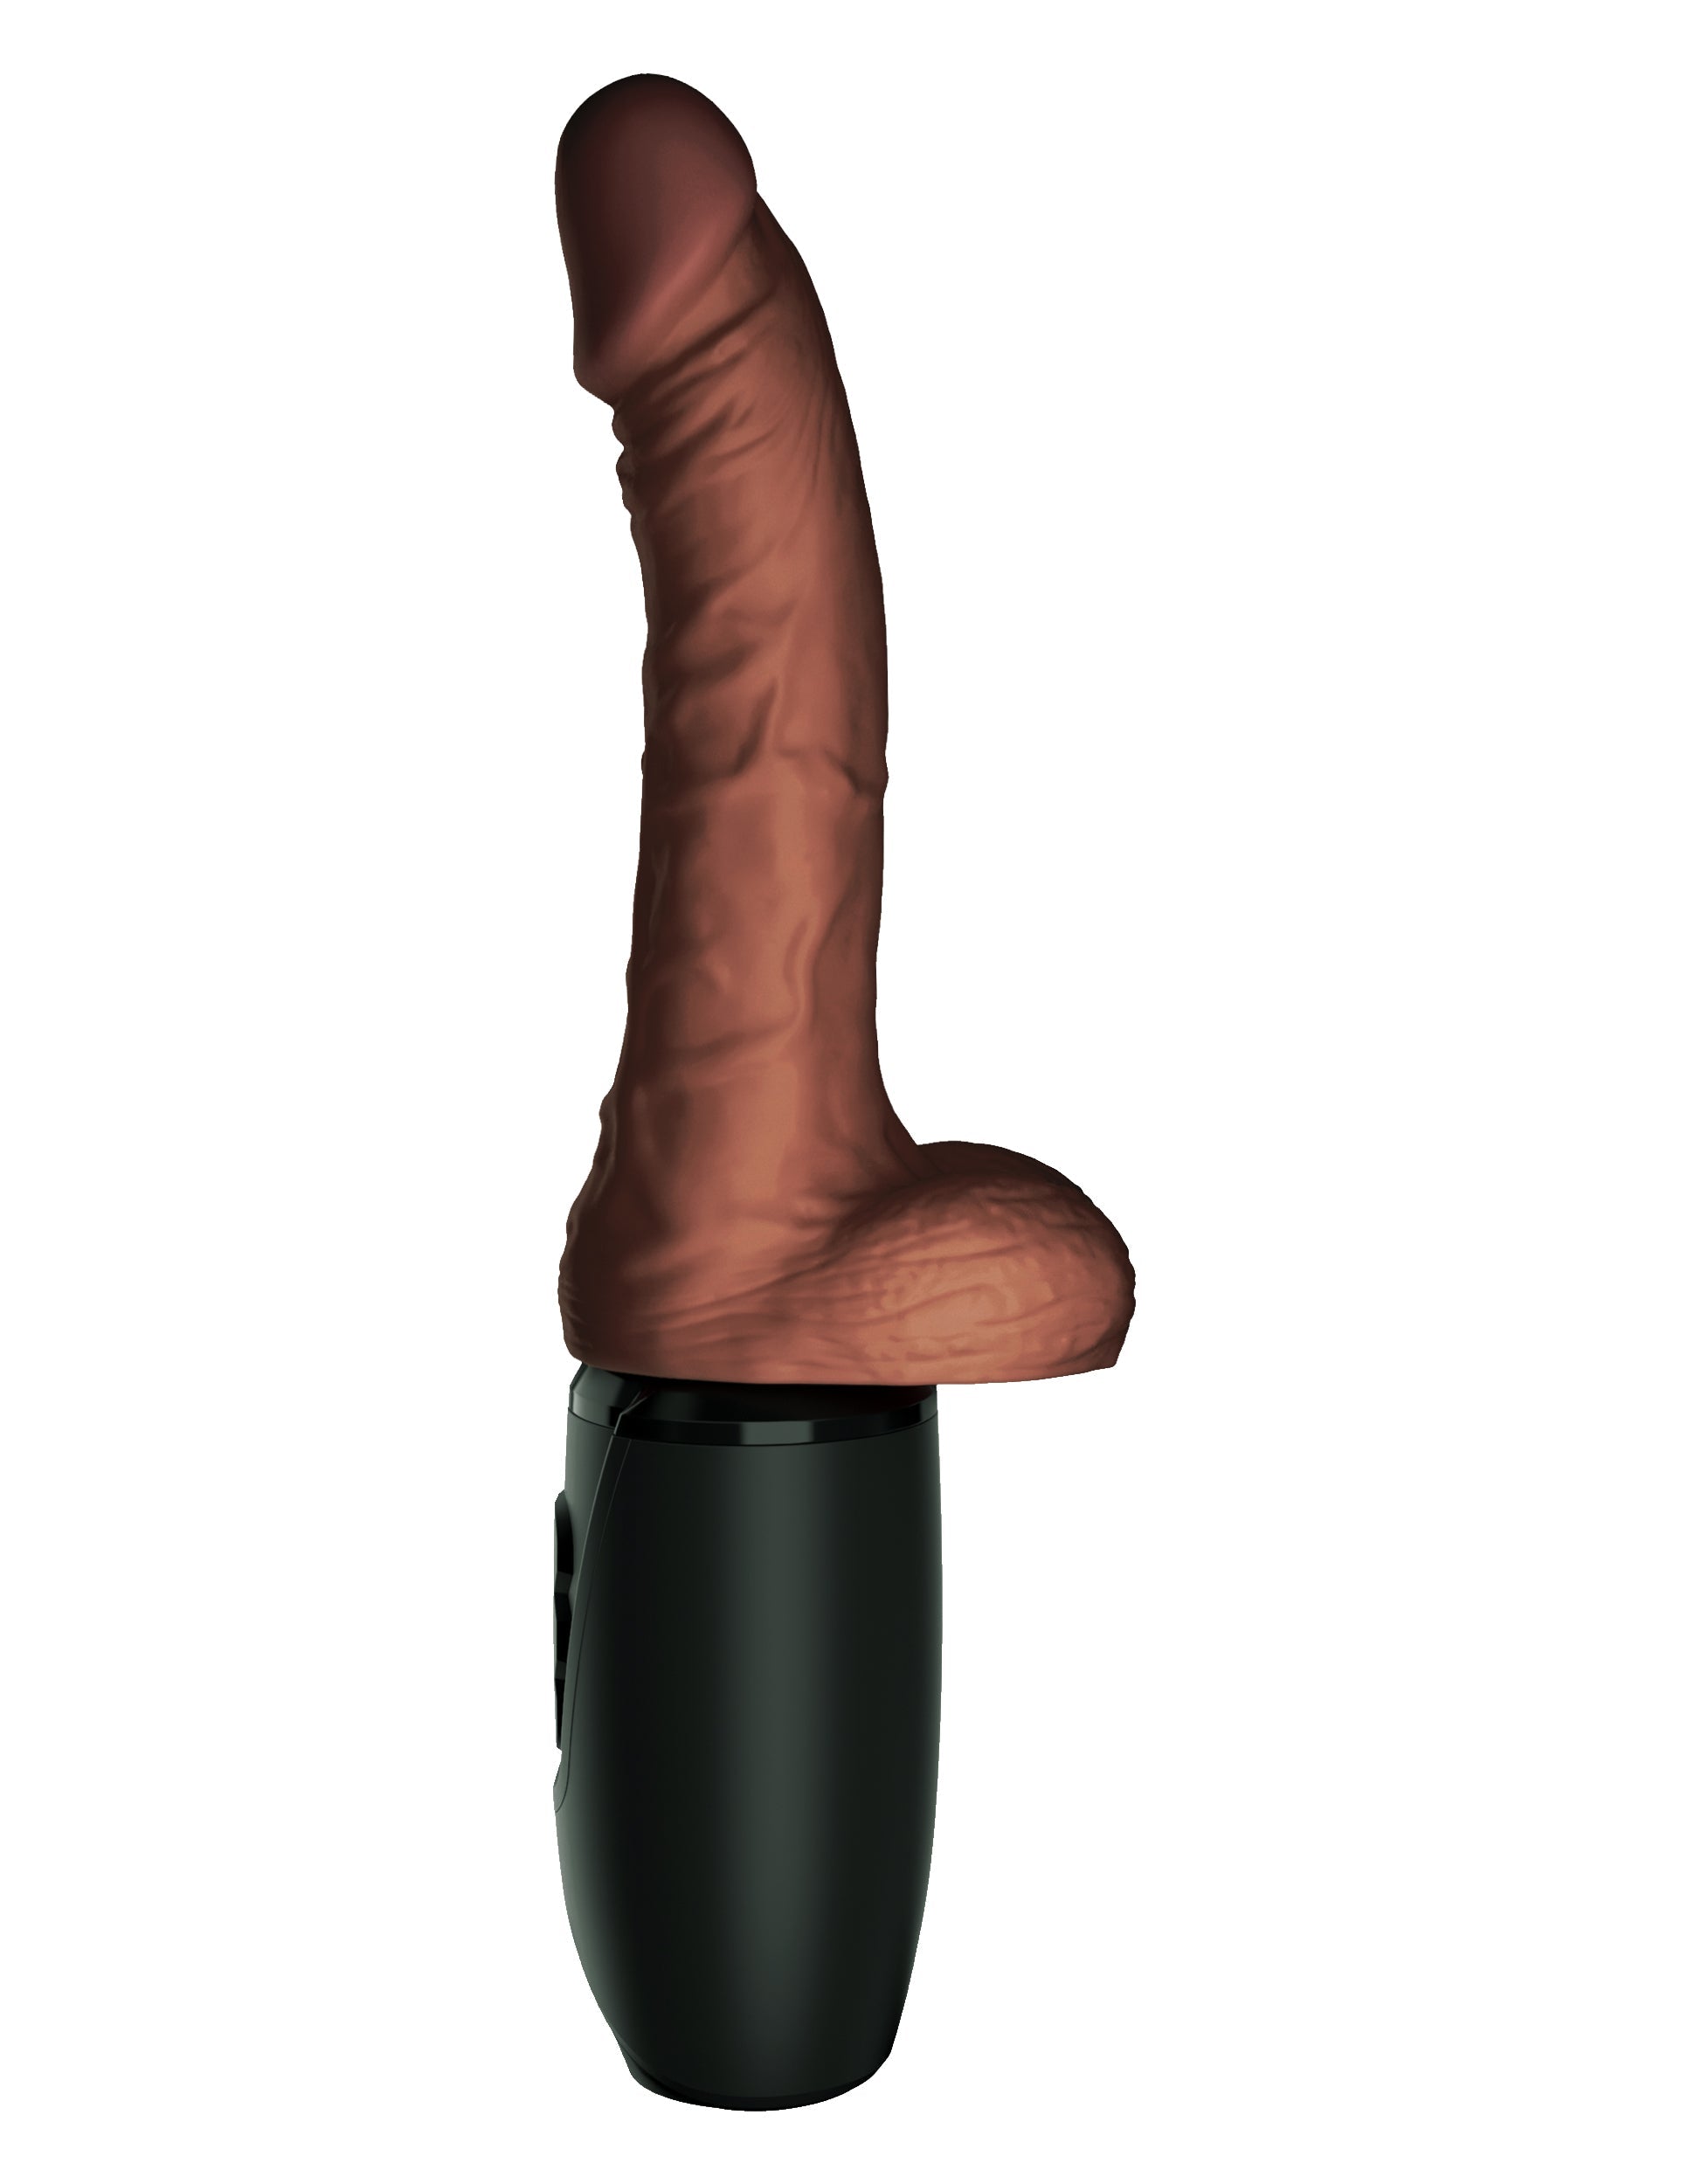 King Cock Plus Rechargeable Thrusting Dildo and LIBERATOR Plum Wanda Toy Mount